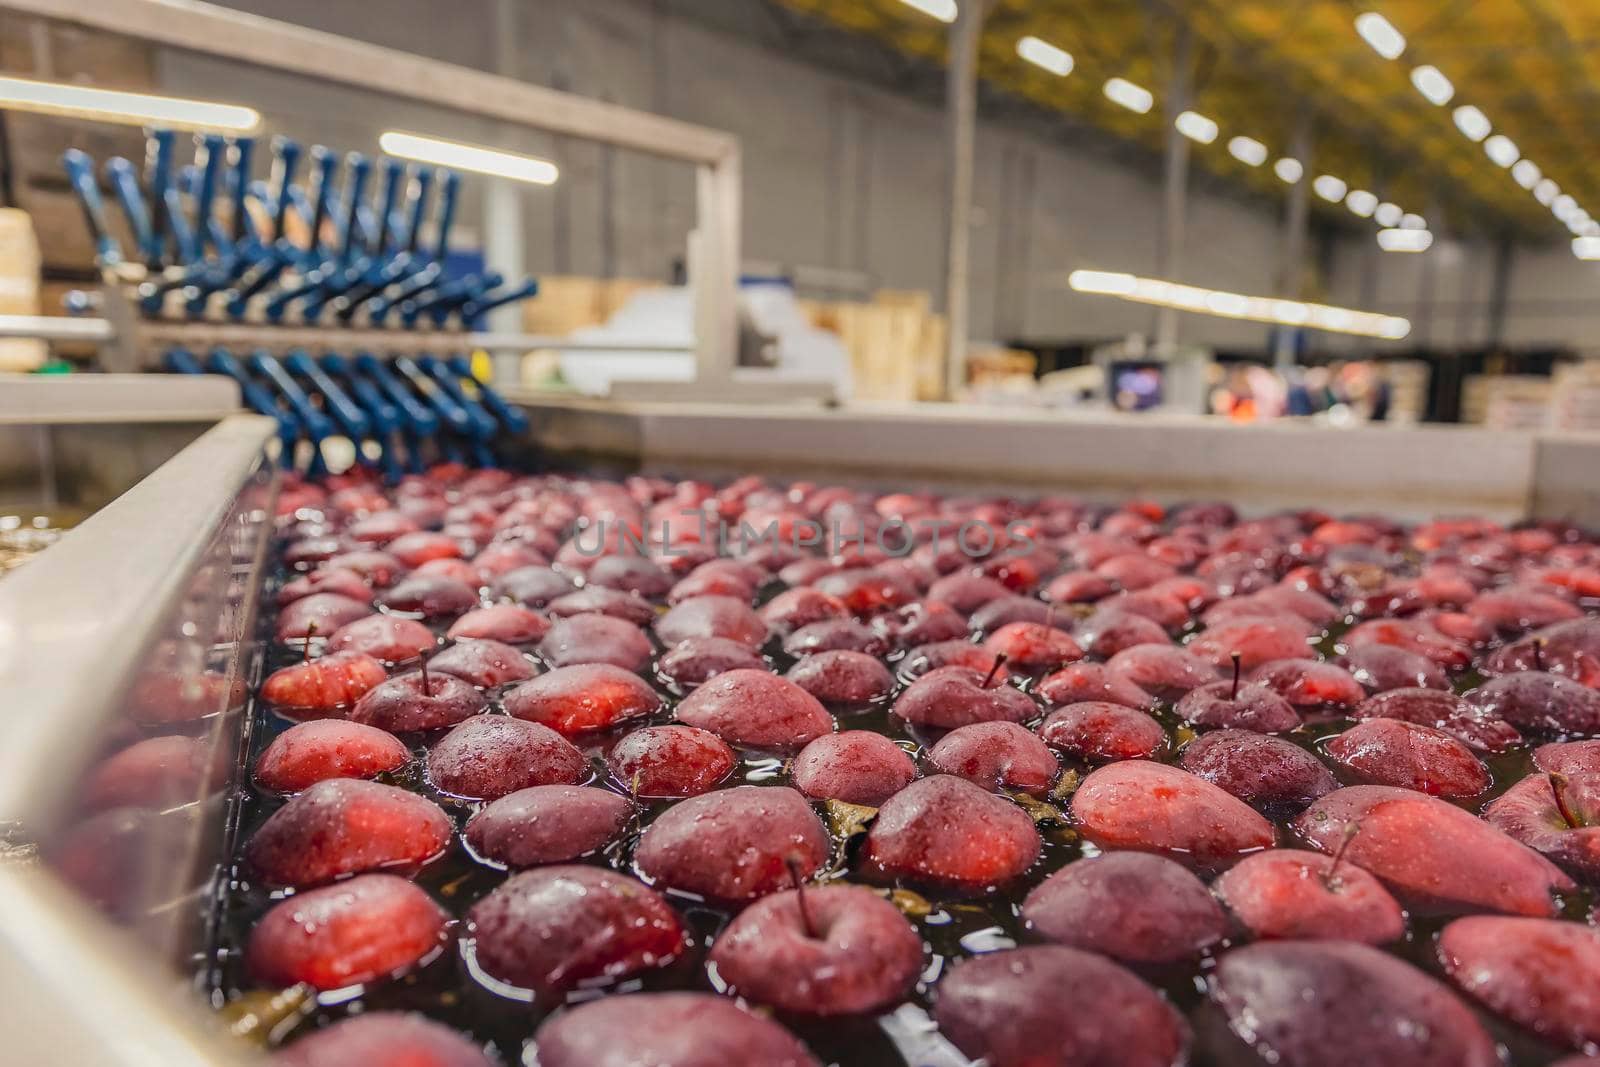 washing red apples in large quantities for further transfer to the packaging line, close-up